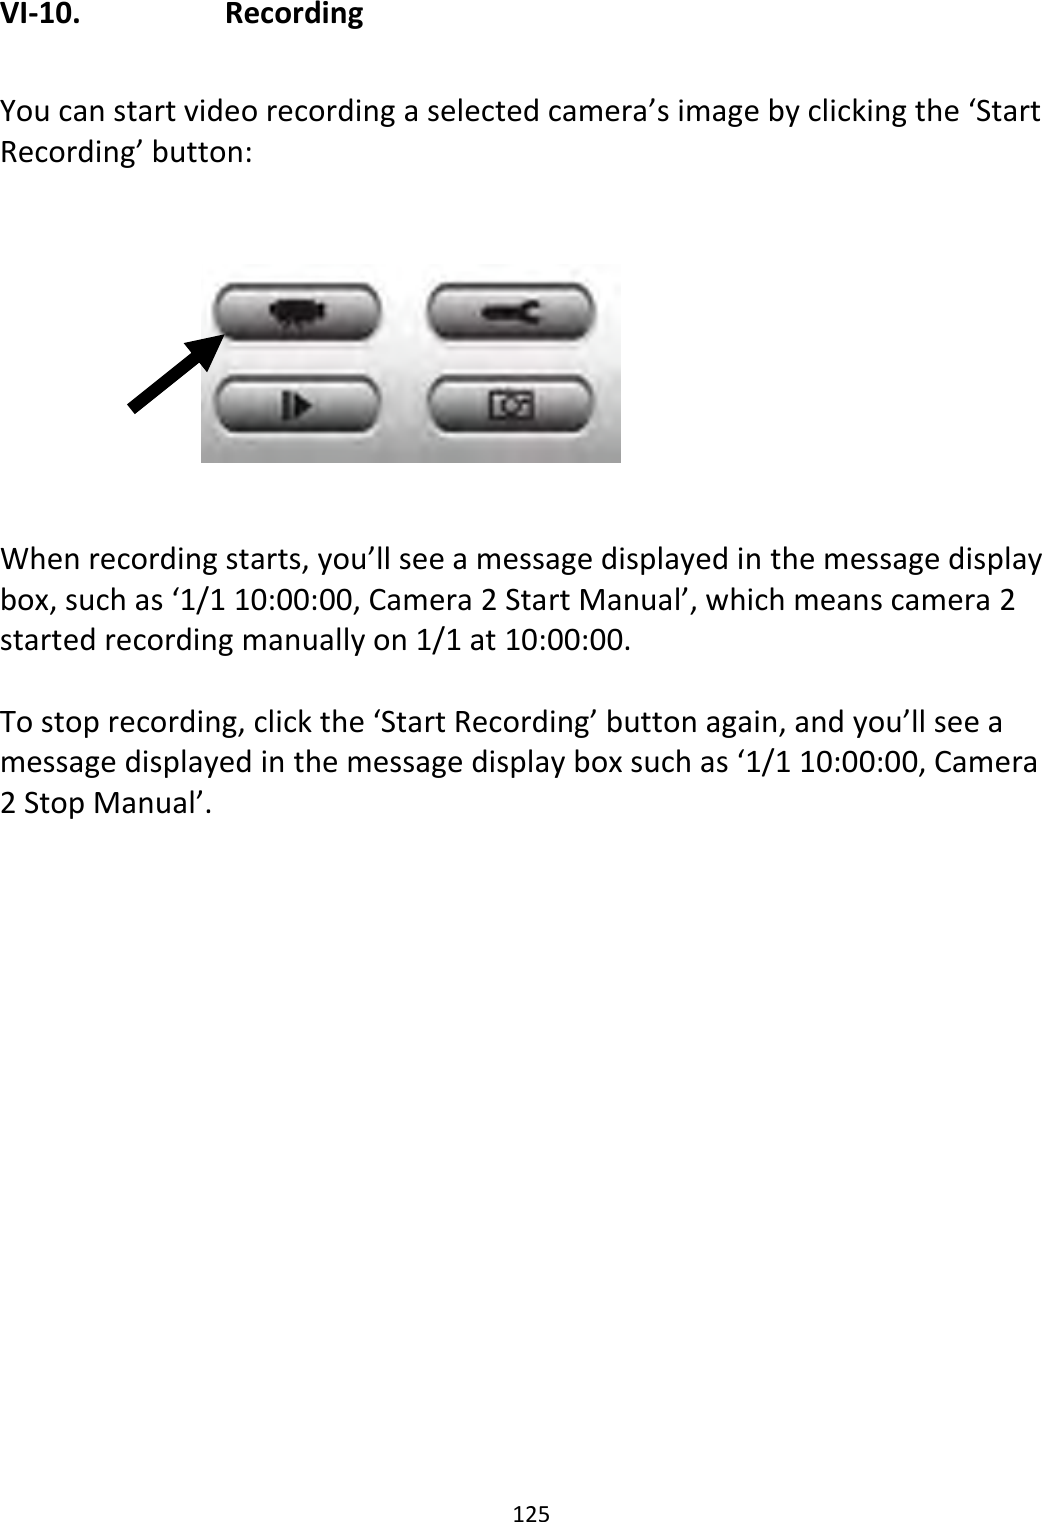 125  VI-10.    Recording  You can start video recording a selected camera’s image by clicking the ‘Start Recording’ button:          When recording starts, you’ll see a message displayed in the message display box, such as ‘1/1 10:00:00, Camera 2 Start Manual’, which means camera 2 started recording manually on 1/1 at 10:00:00.   To stop recording, click the ‘Start Recording’ button again, and you’ll see a message displayed in the message display box such as ‘1/1 10:00:00, Camera 2 Stop Manual’.  